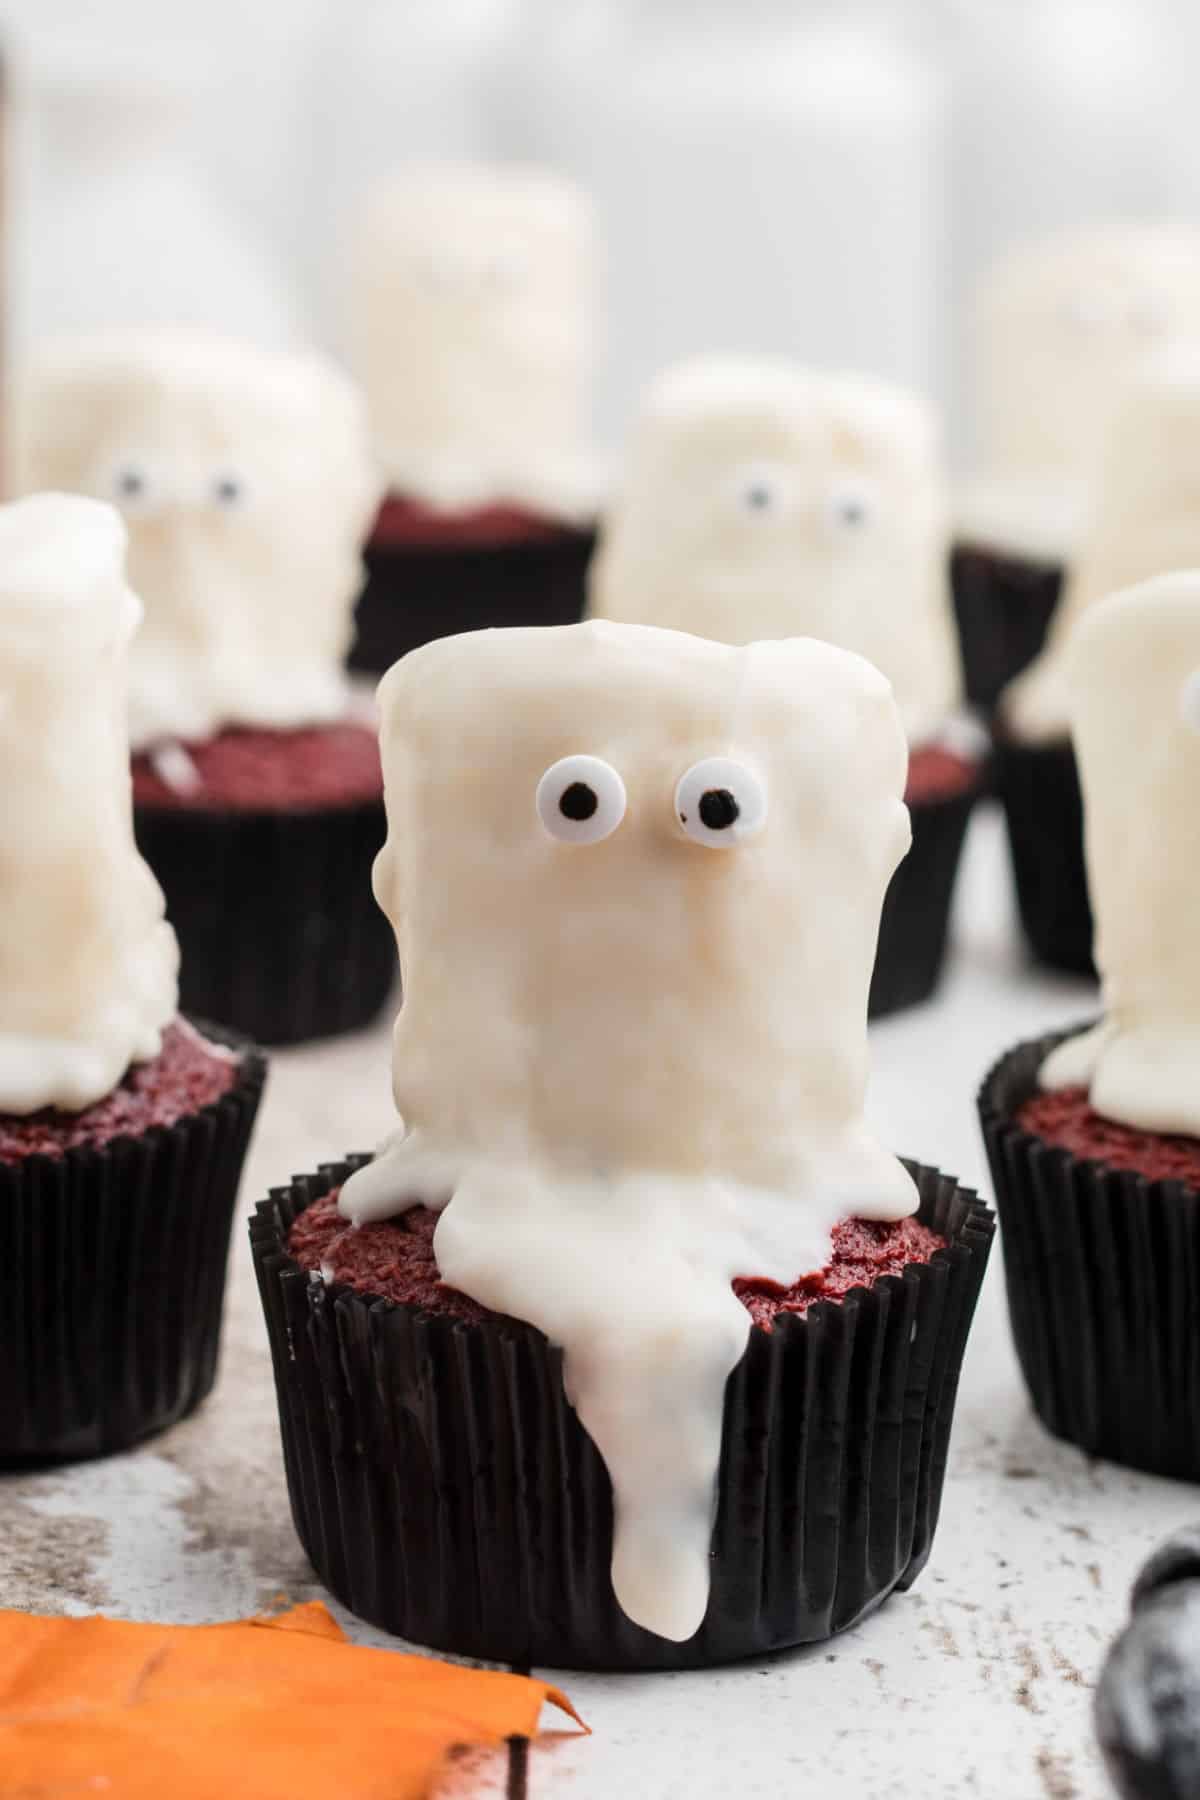 close up of a ghost cupcake made from marshmallow.